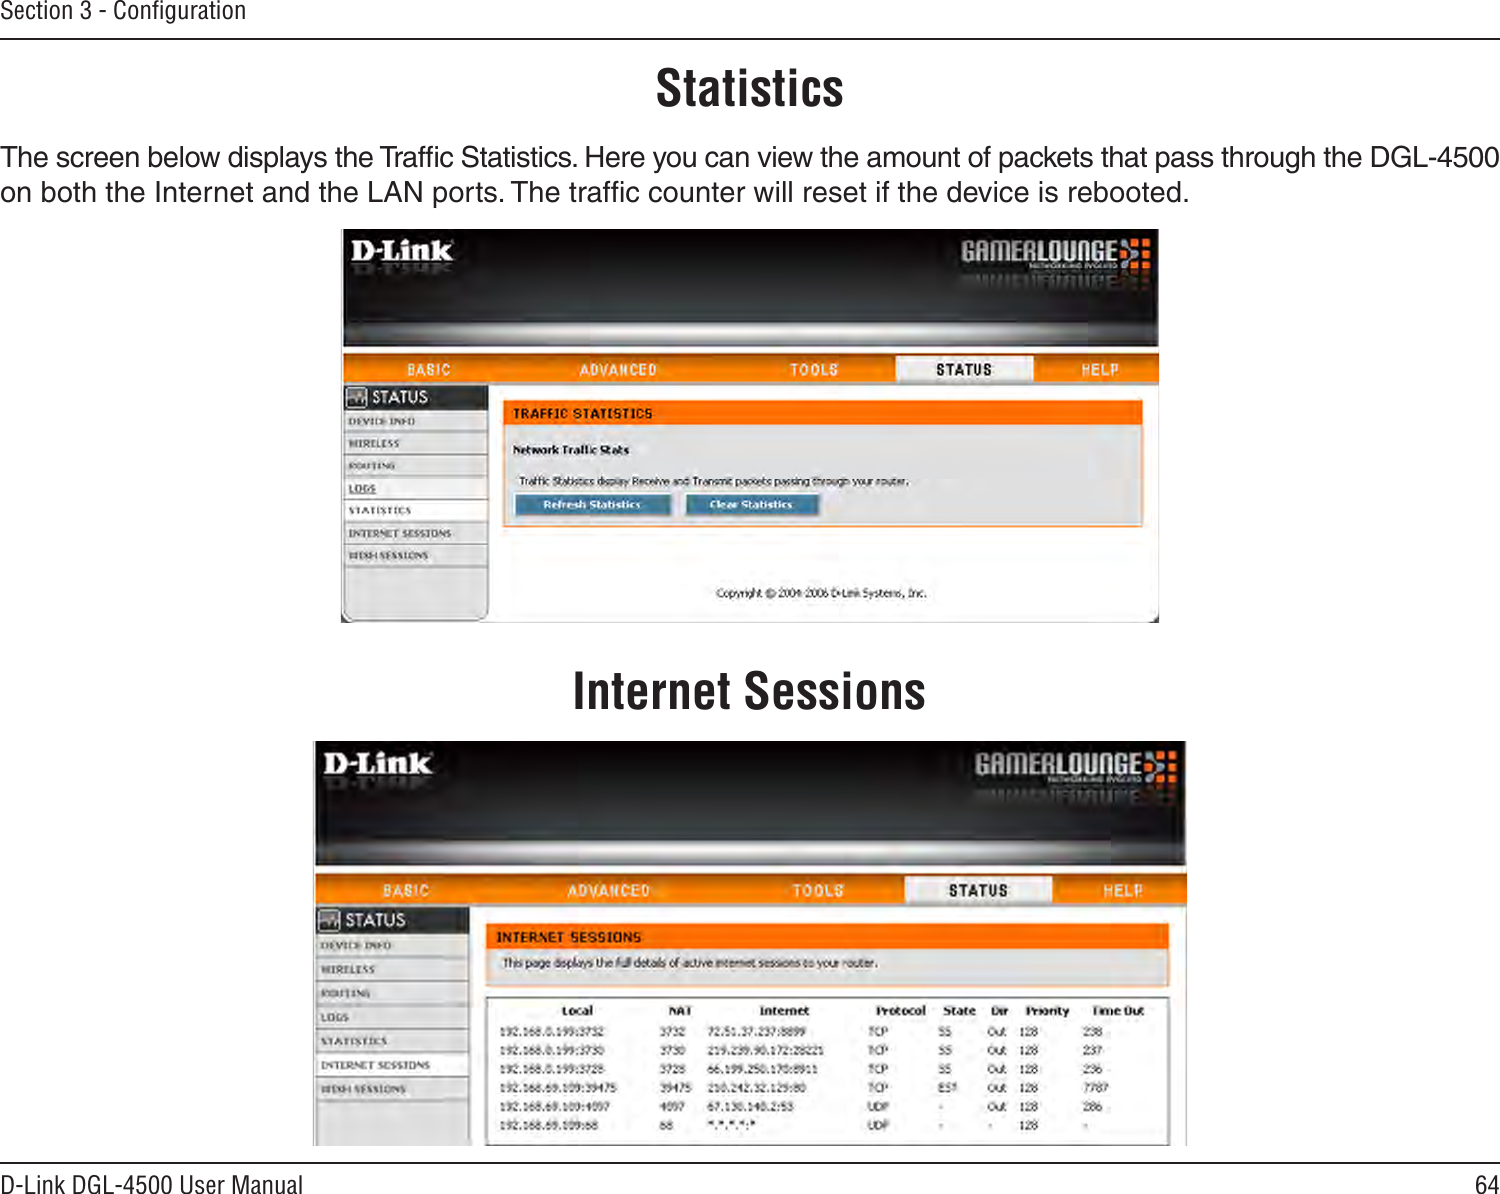 64D-Link DGL-4500 User ManualSection 3 - ConﬁgurationStatisticsThe screen below displays the Trafﬁc Statistics. Here you can view the amount of packets that pass through the DGL-4500 on both the Internet and the LAN ports. The trafﬁc counter will reset if the device is rebooted.Internet Sessions